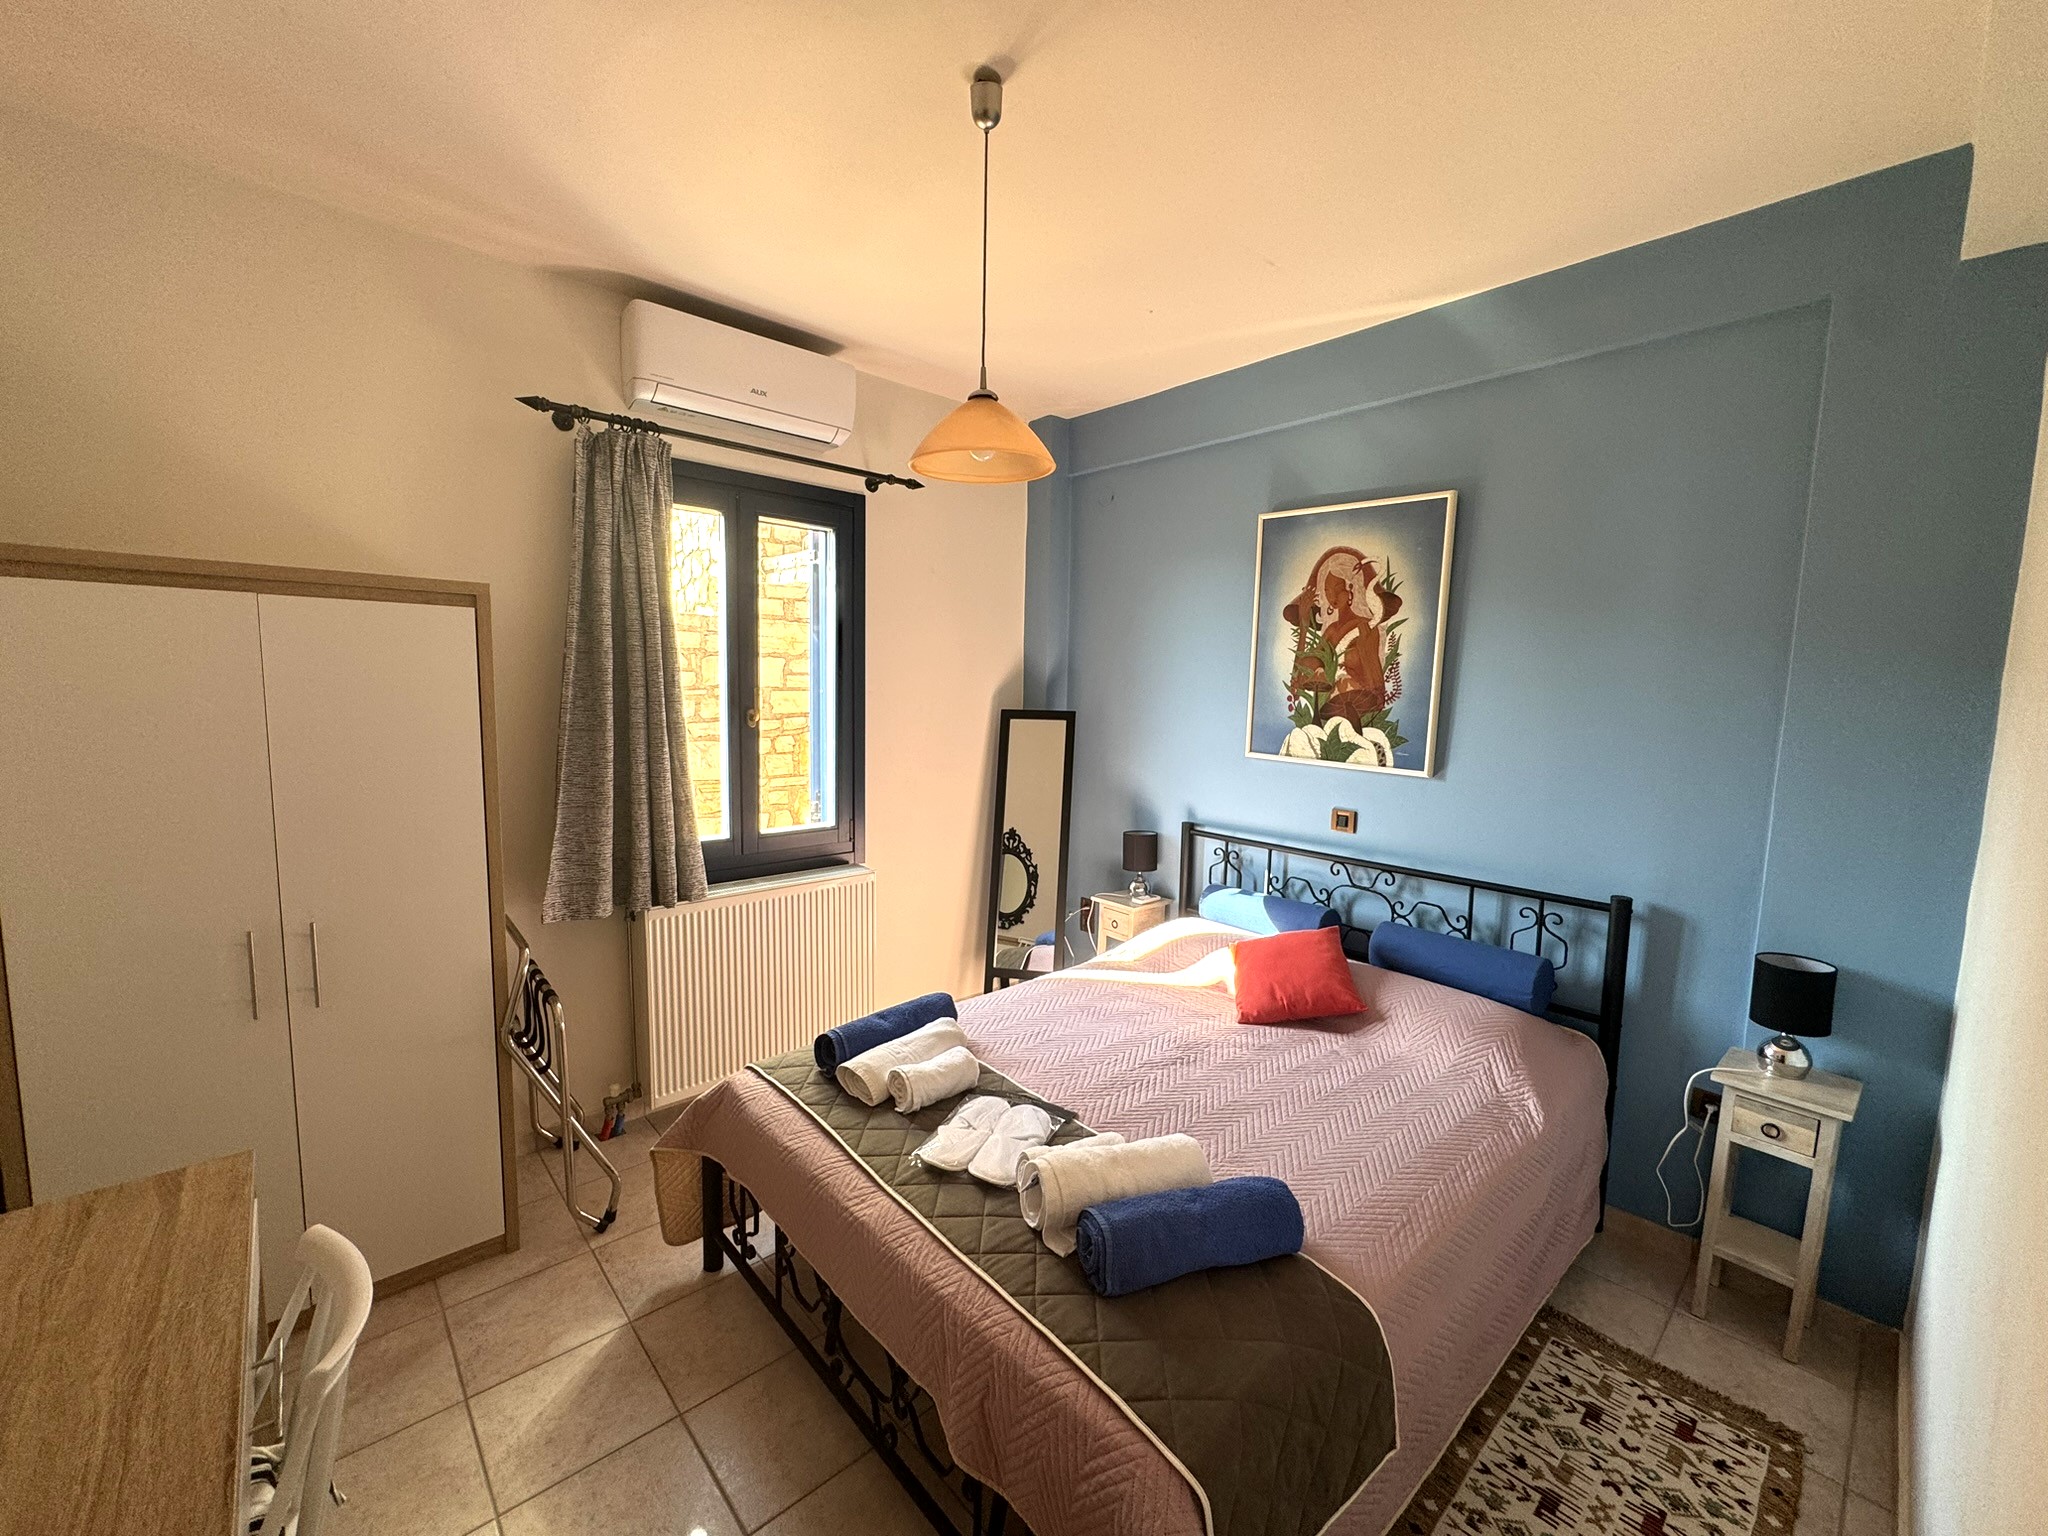 Downstairs double bedroom of house for sale in Ithaca Greece Kioni